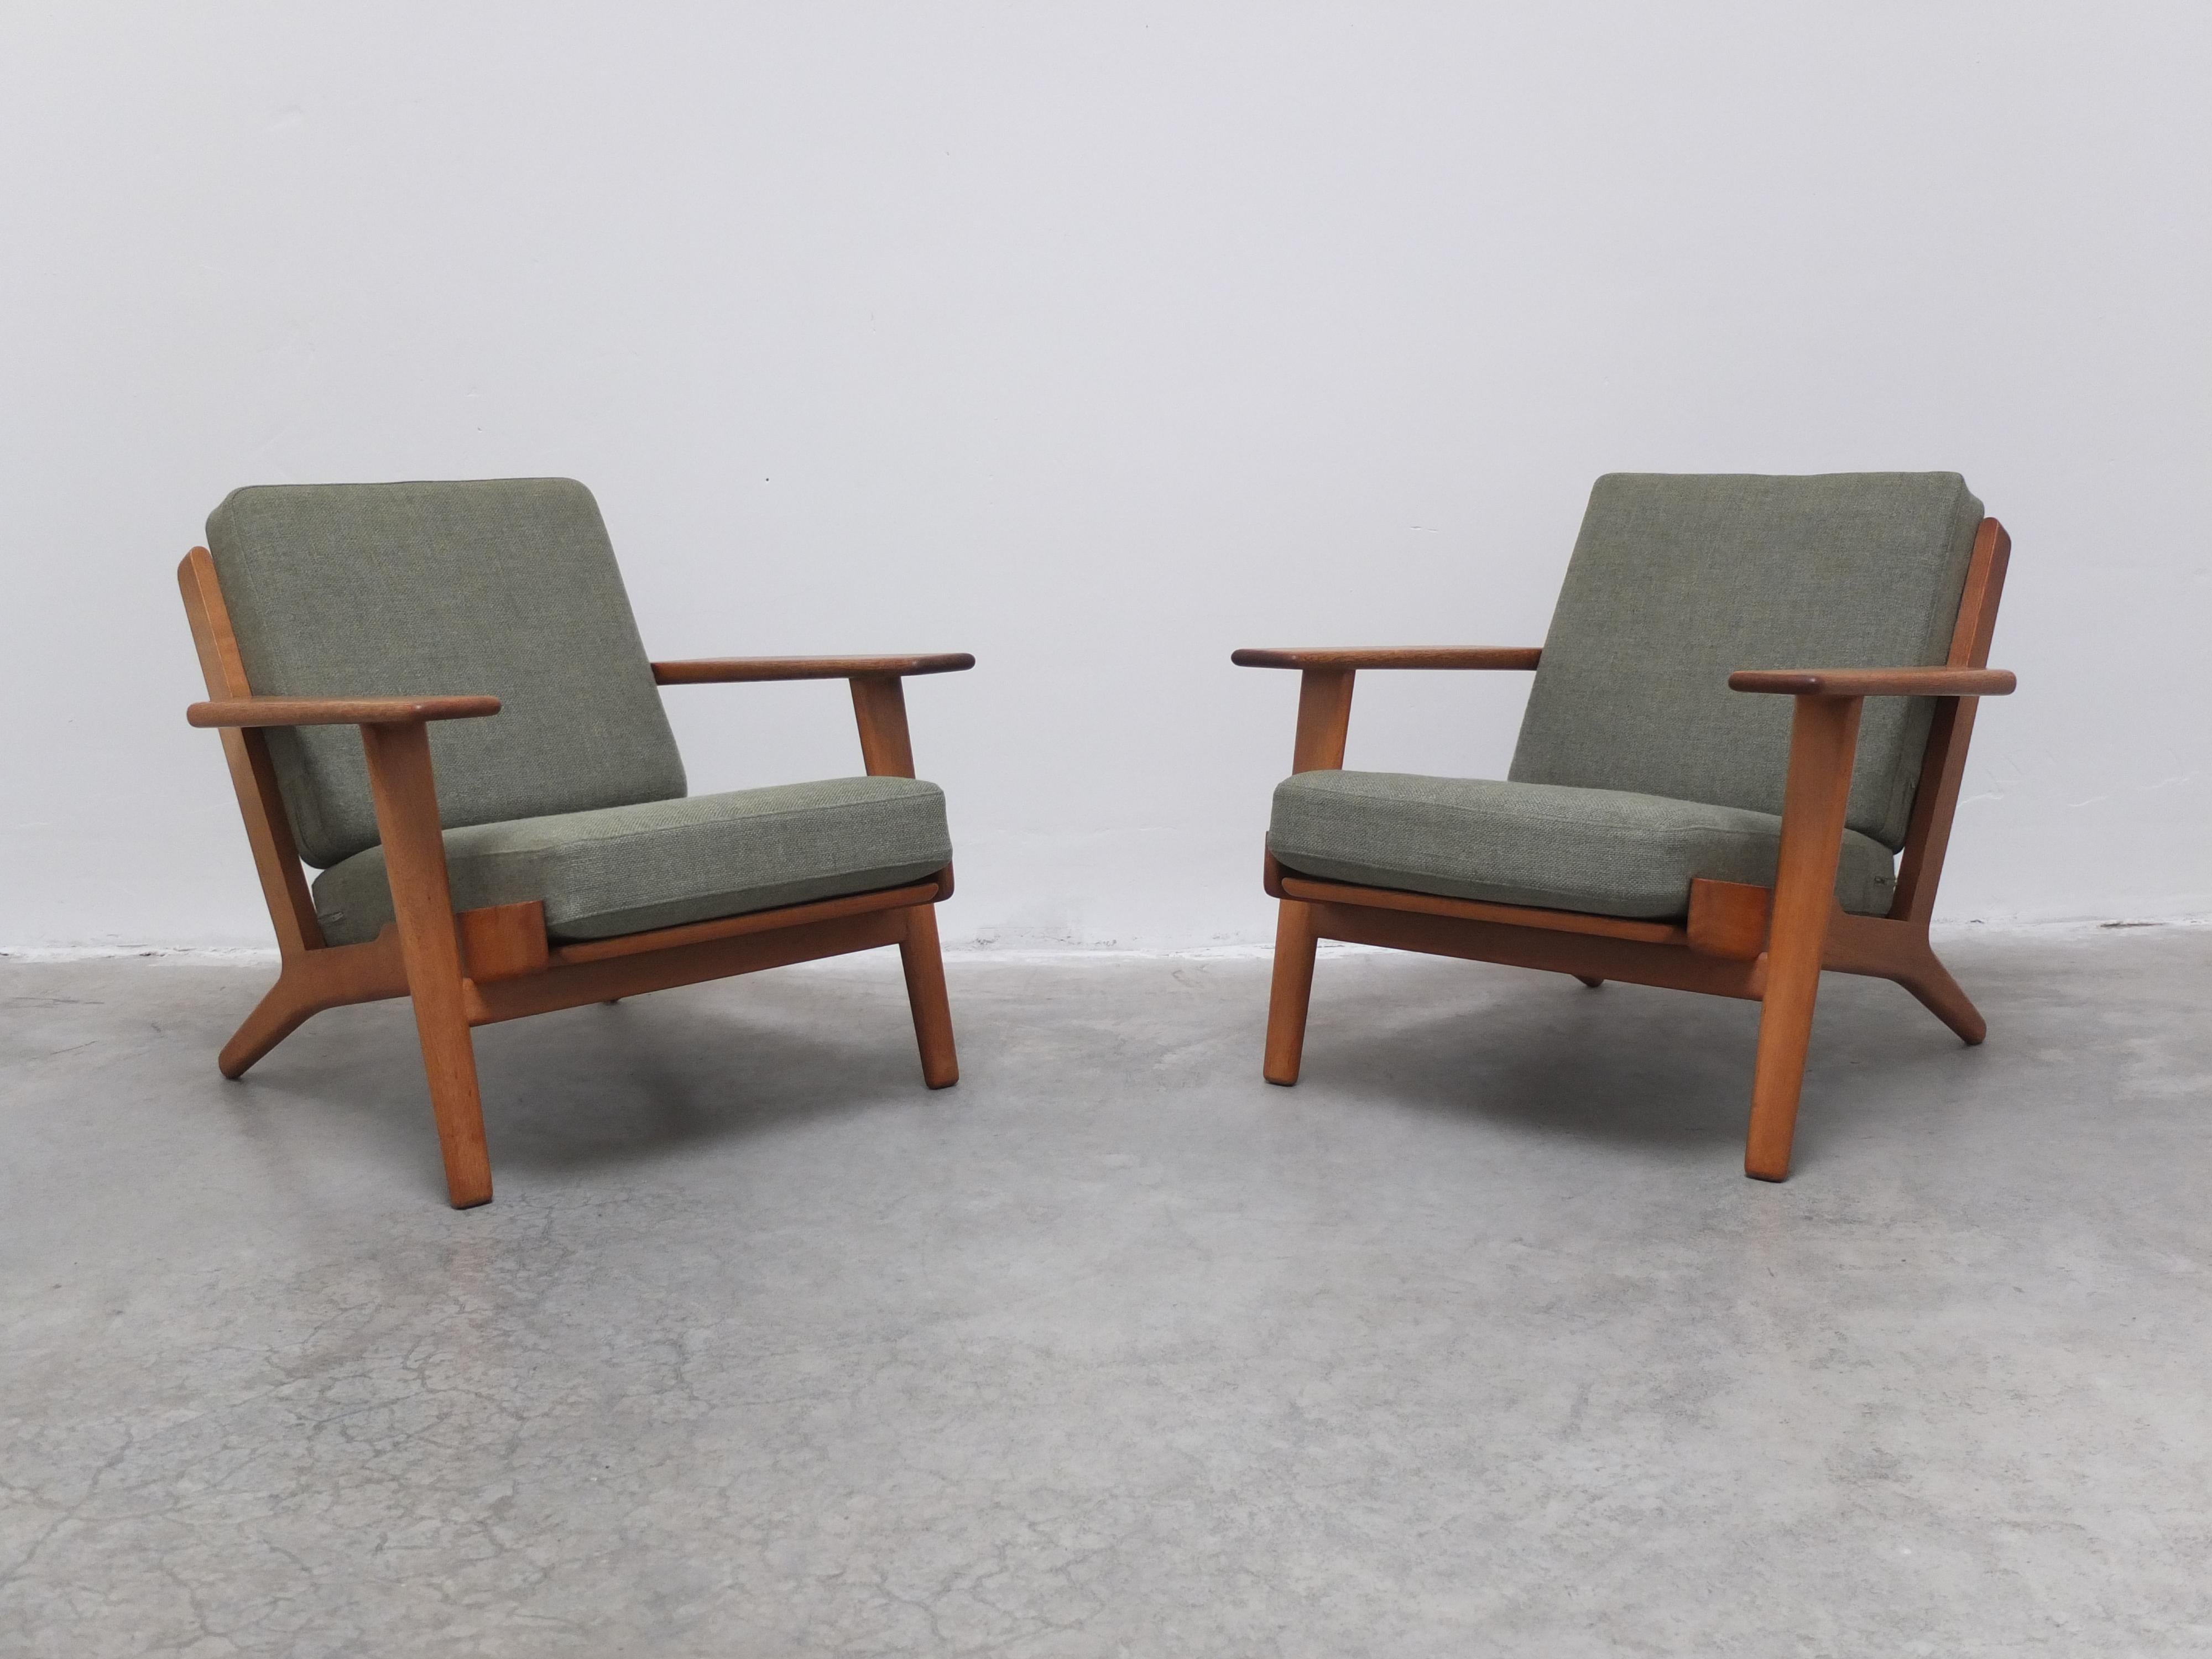 Danish Early Pair of Oak 'GE-290' Lounge Chairs by Hans Wegner for Getama, 1953 For Sale